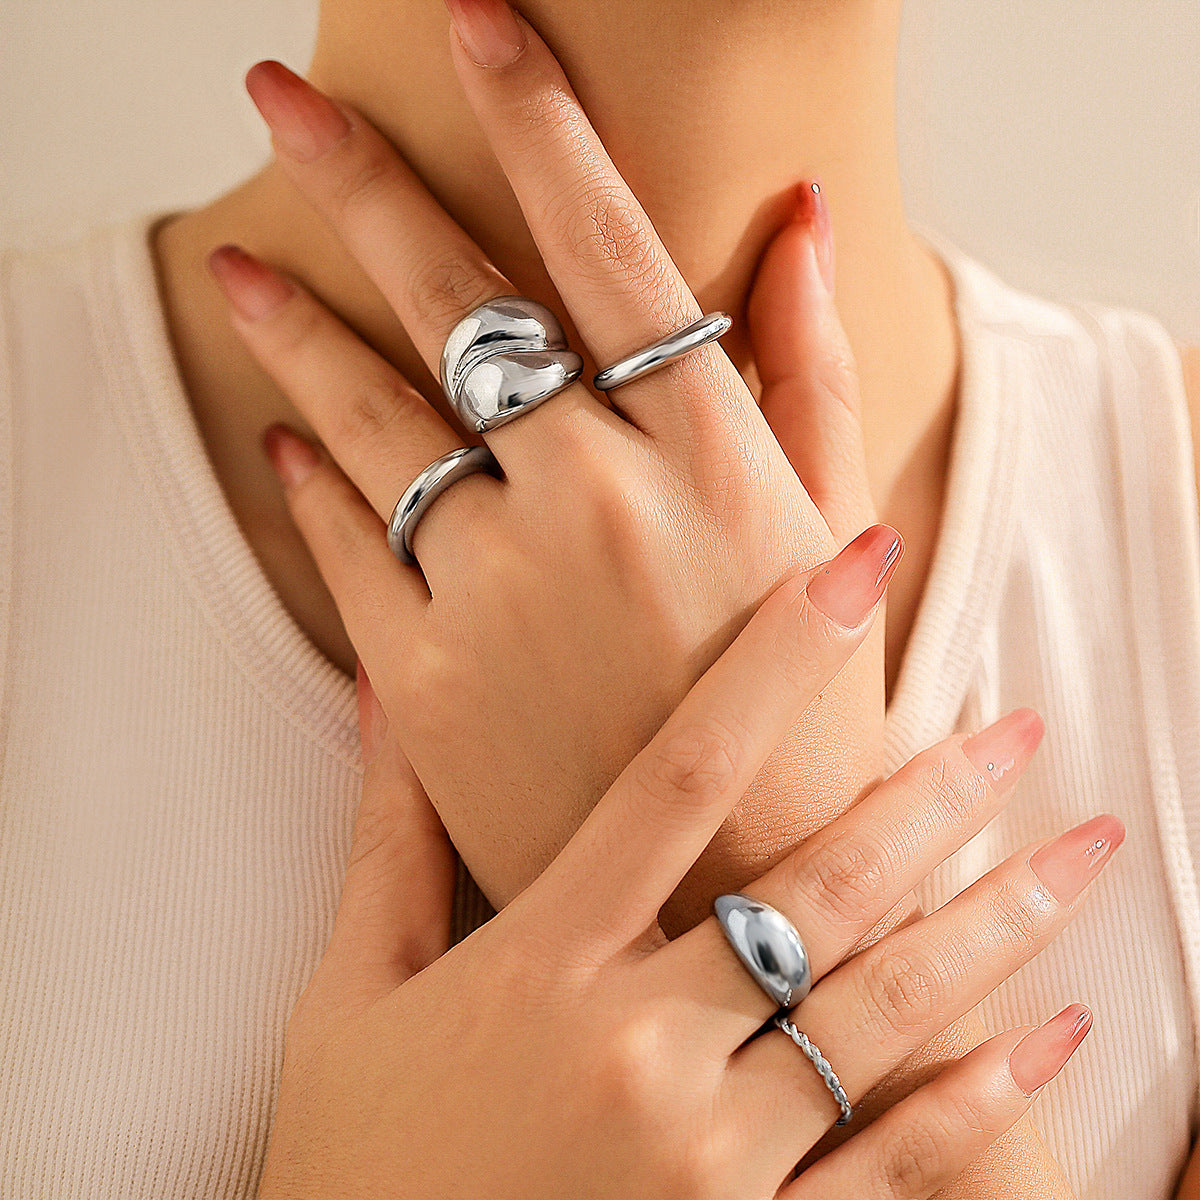 European and American Fusion Jewelry Collection, Unique Style, Chic Design, Curved Geometric Rings, Interlocking Bands, Bold Statement Ring Set